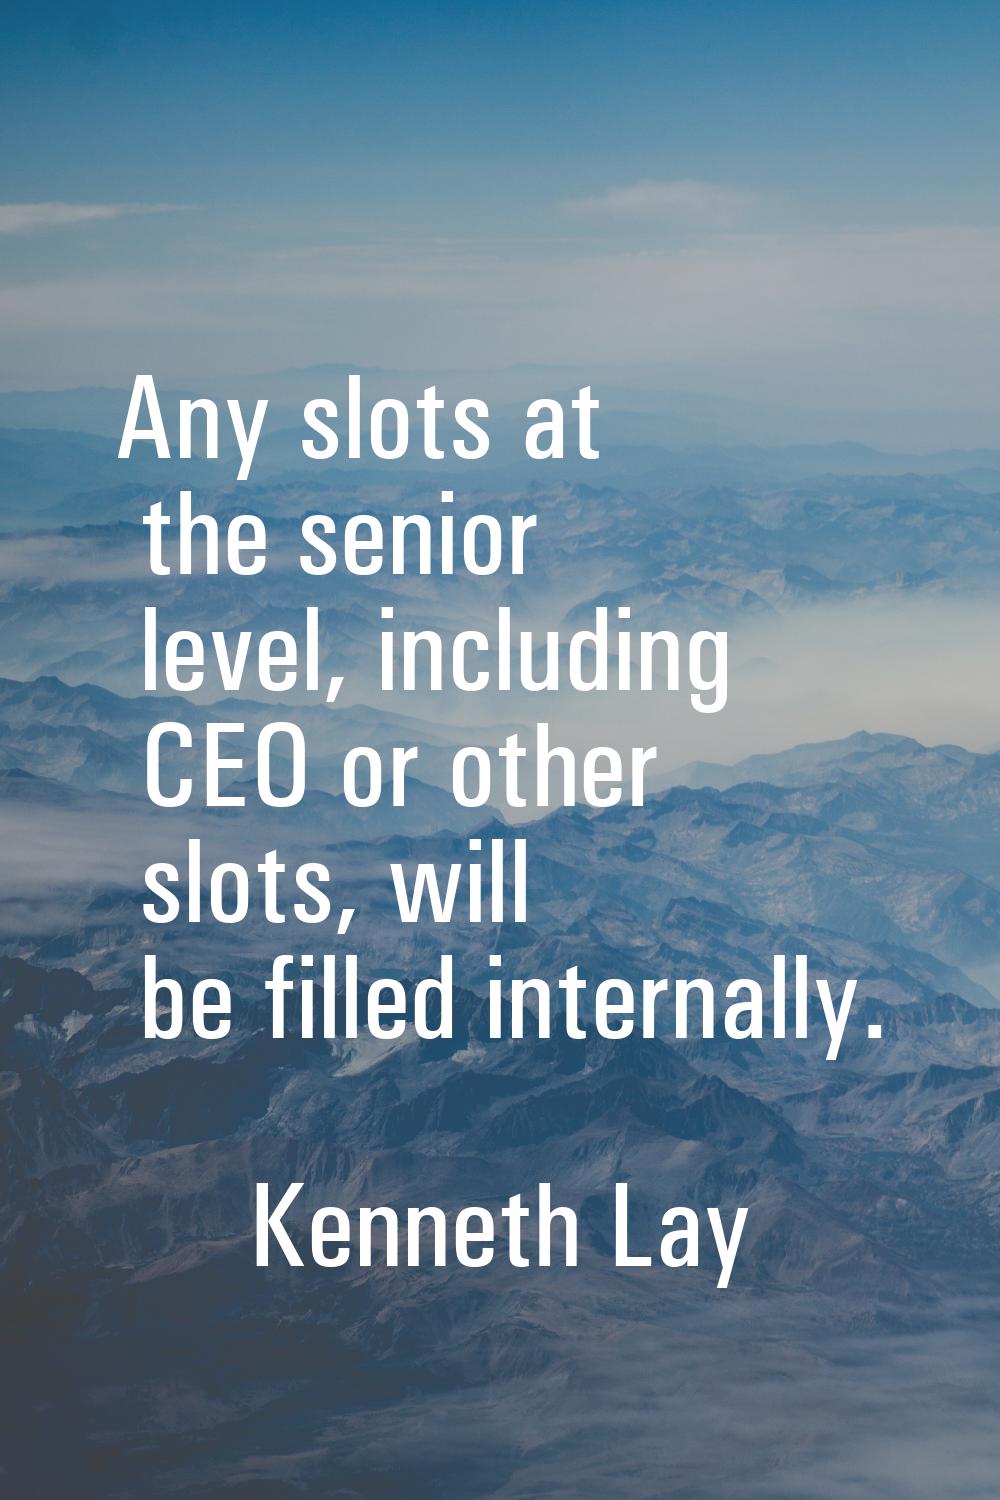 Any slots at the senior level, including CEO or other slots, will be filled internally.